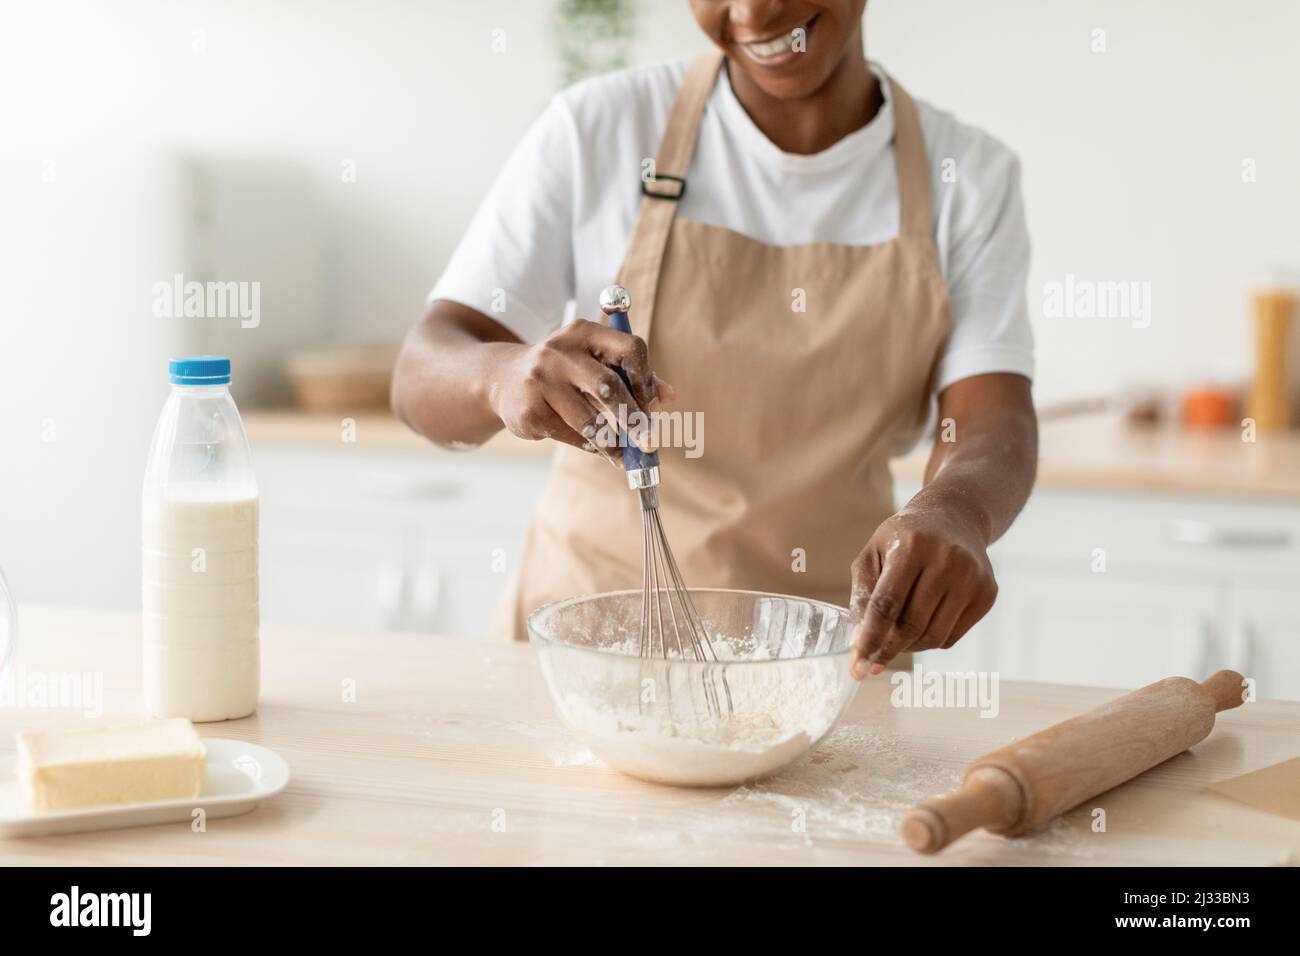 Smiling millennial african american woman in apron preparing dough for pie in minimalist kitchen interior Stock Photo